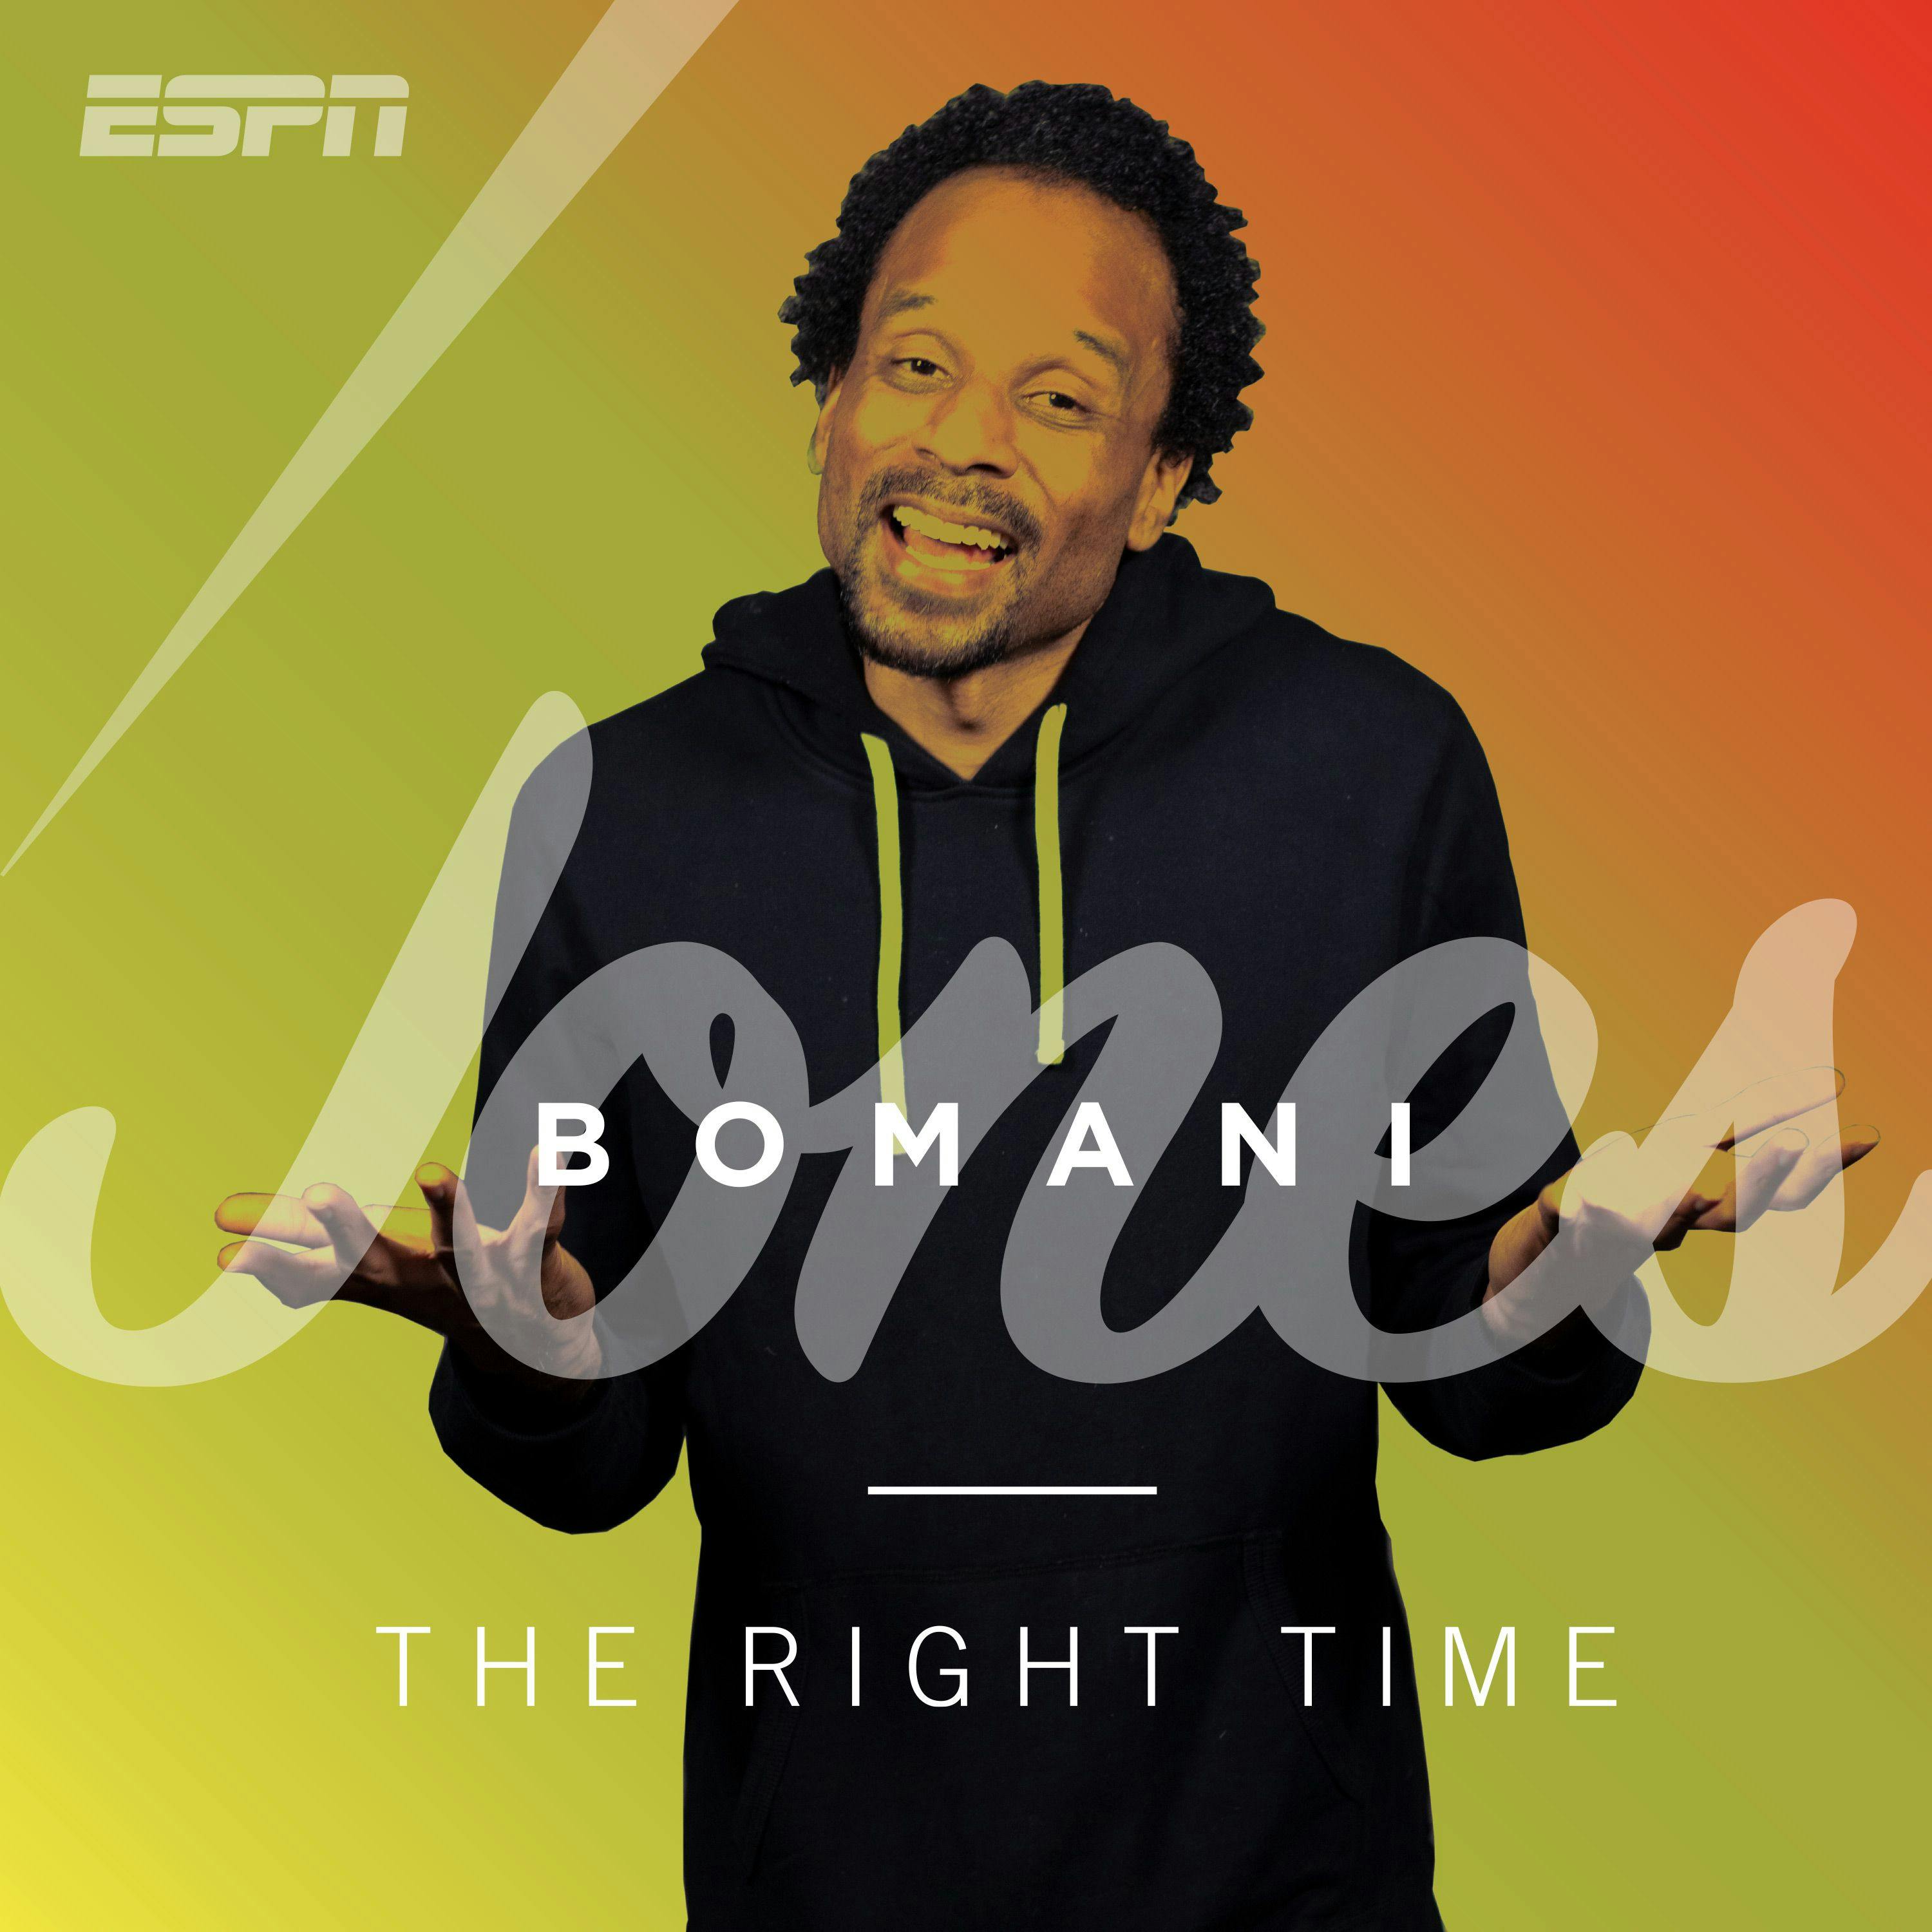 X Sex Video Download 18 Years Old - The Right Time with Bomani Jones Show - PodCenter - ESPN Radio